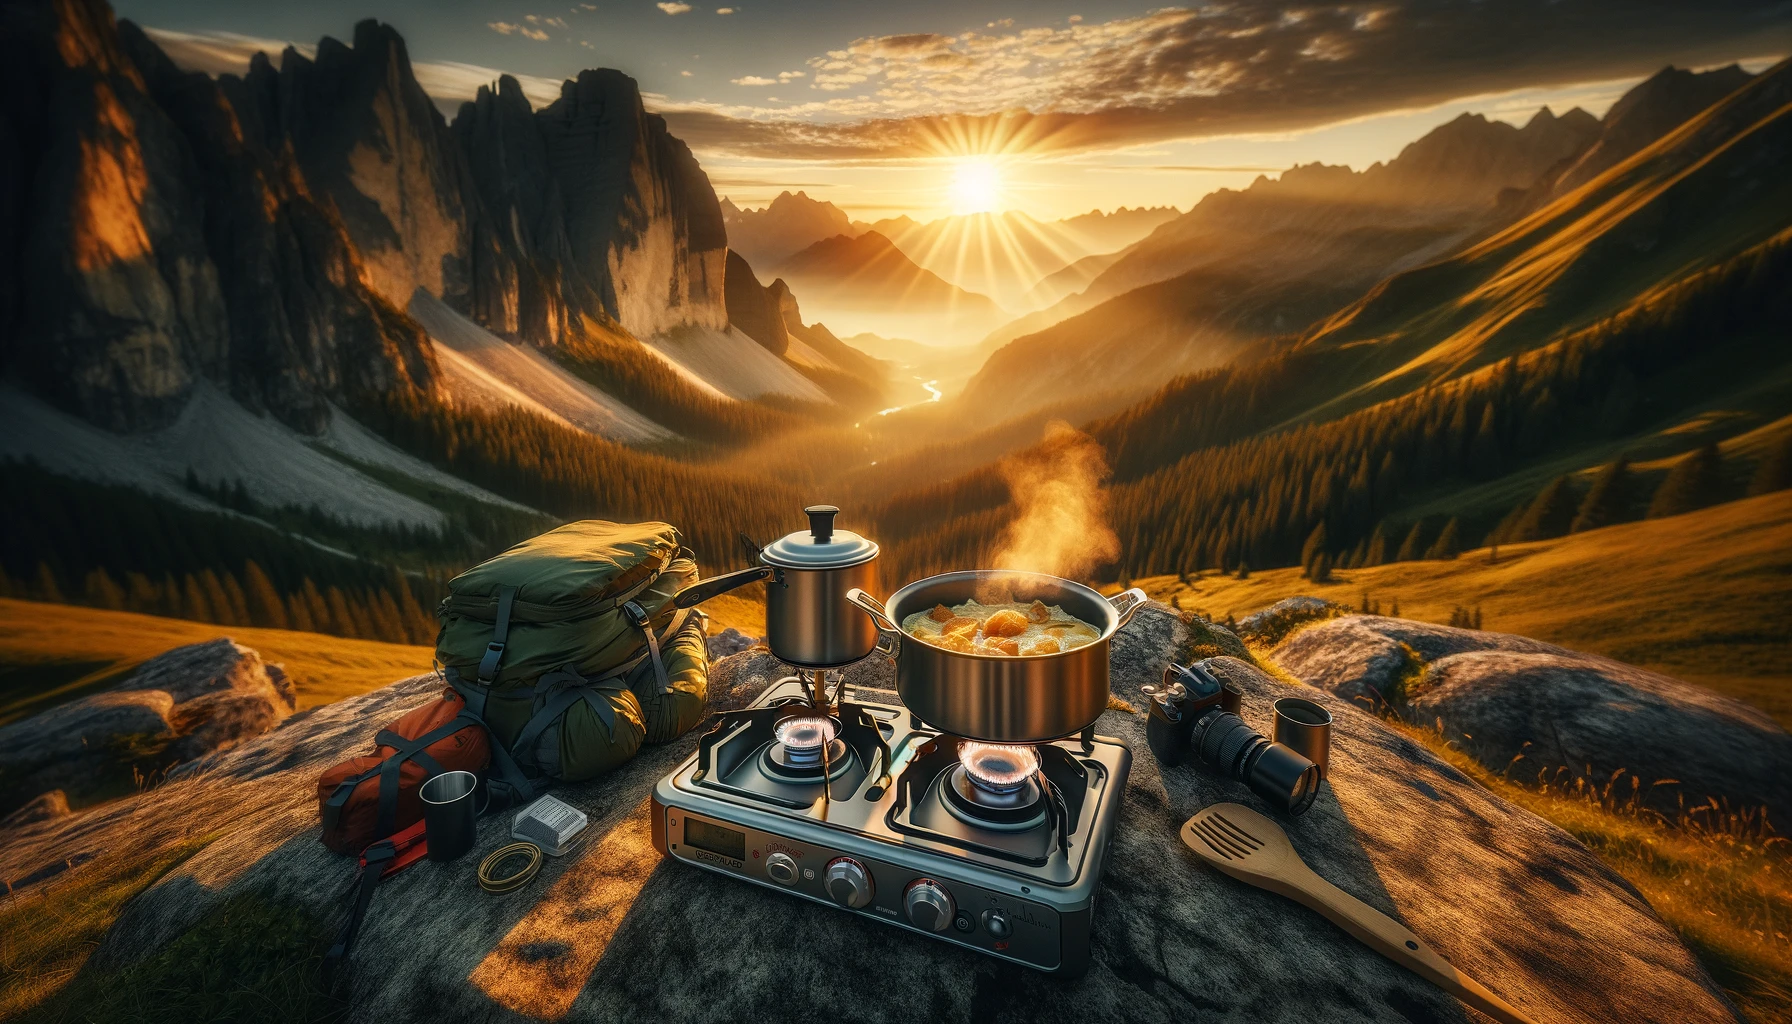 Breathtaking mountainous landscape at sunrise with a compact gas stove in use, highlighting the convenience of gas stoves for reliable off-grid meals, showcasing a solo traveler preparing breakfast in the wilderness